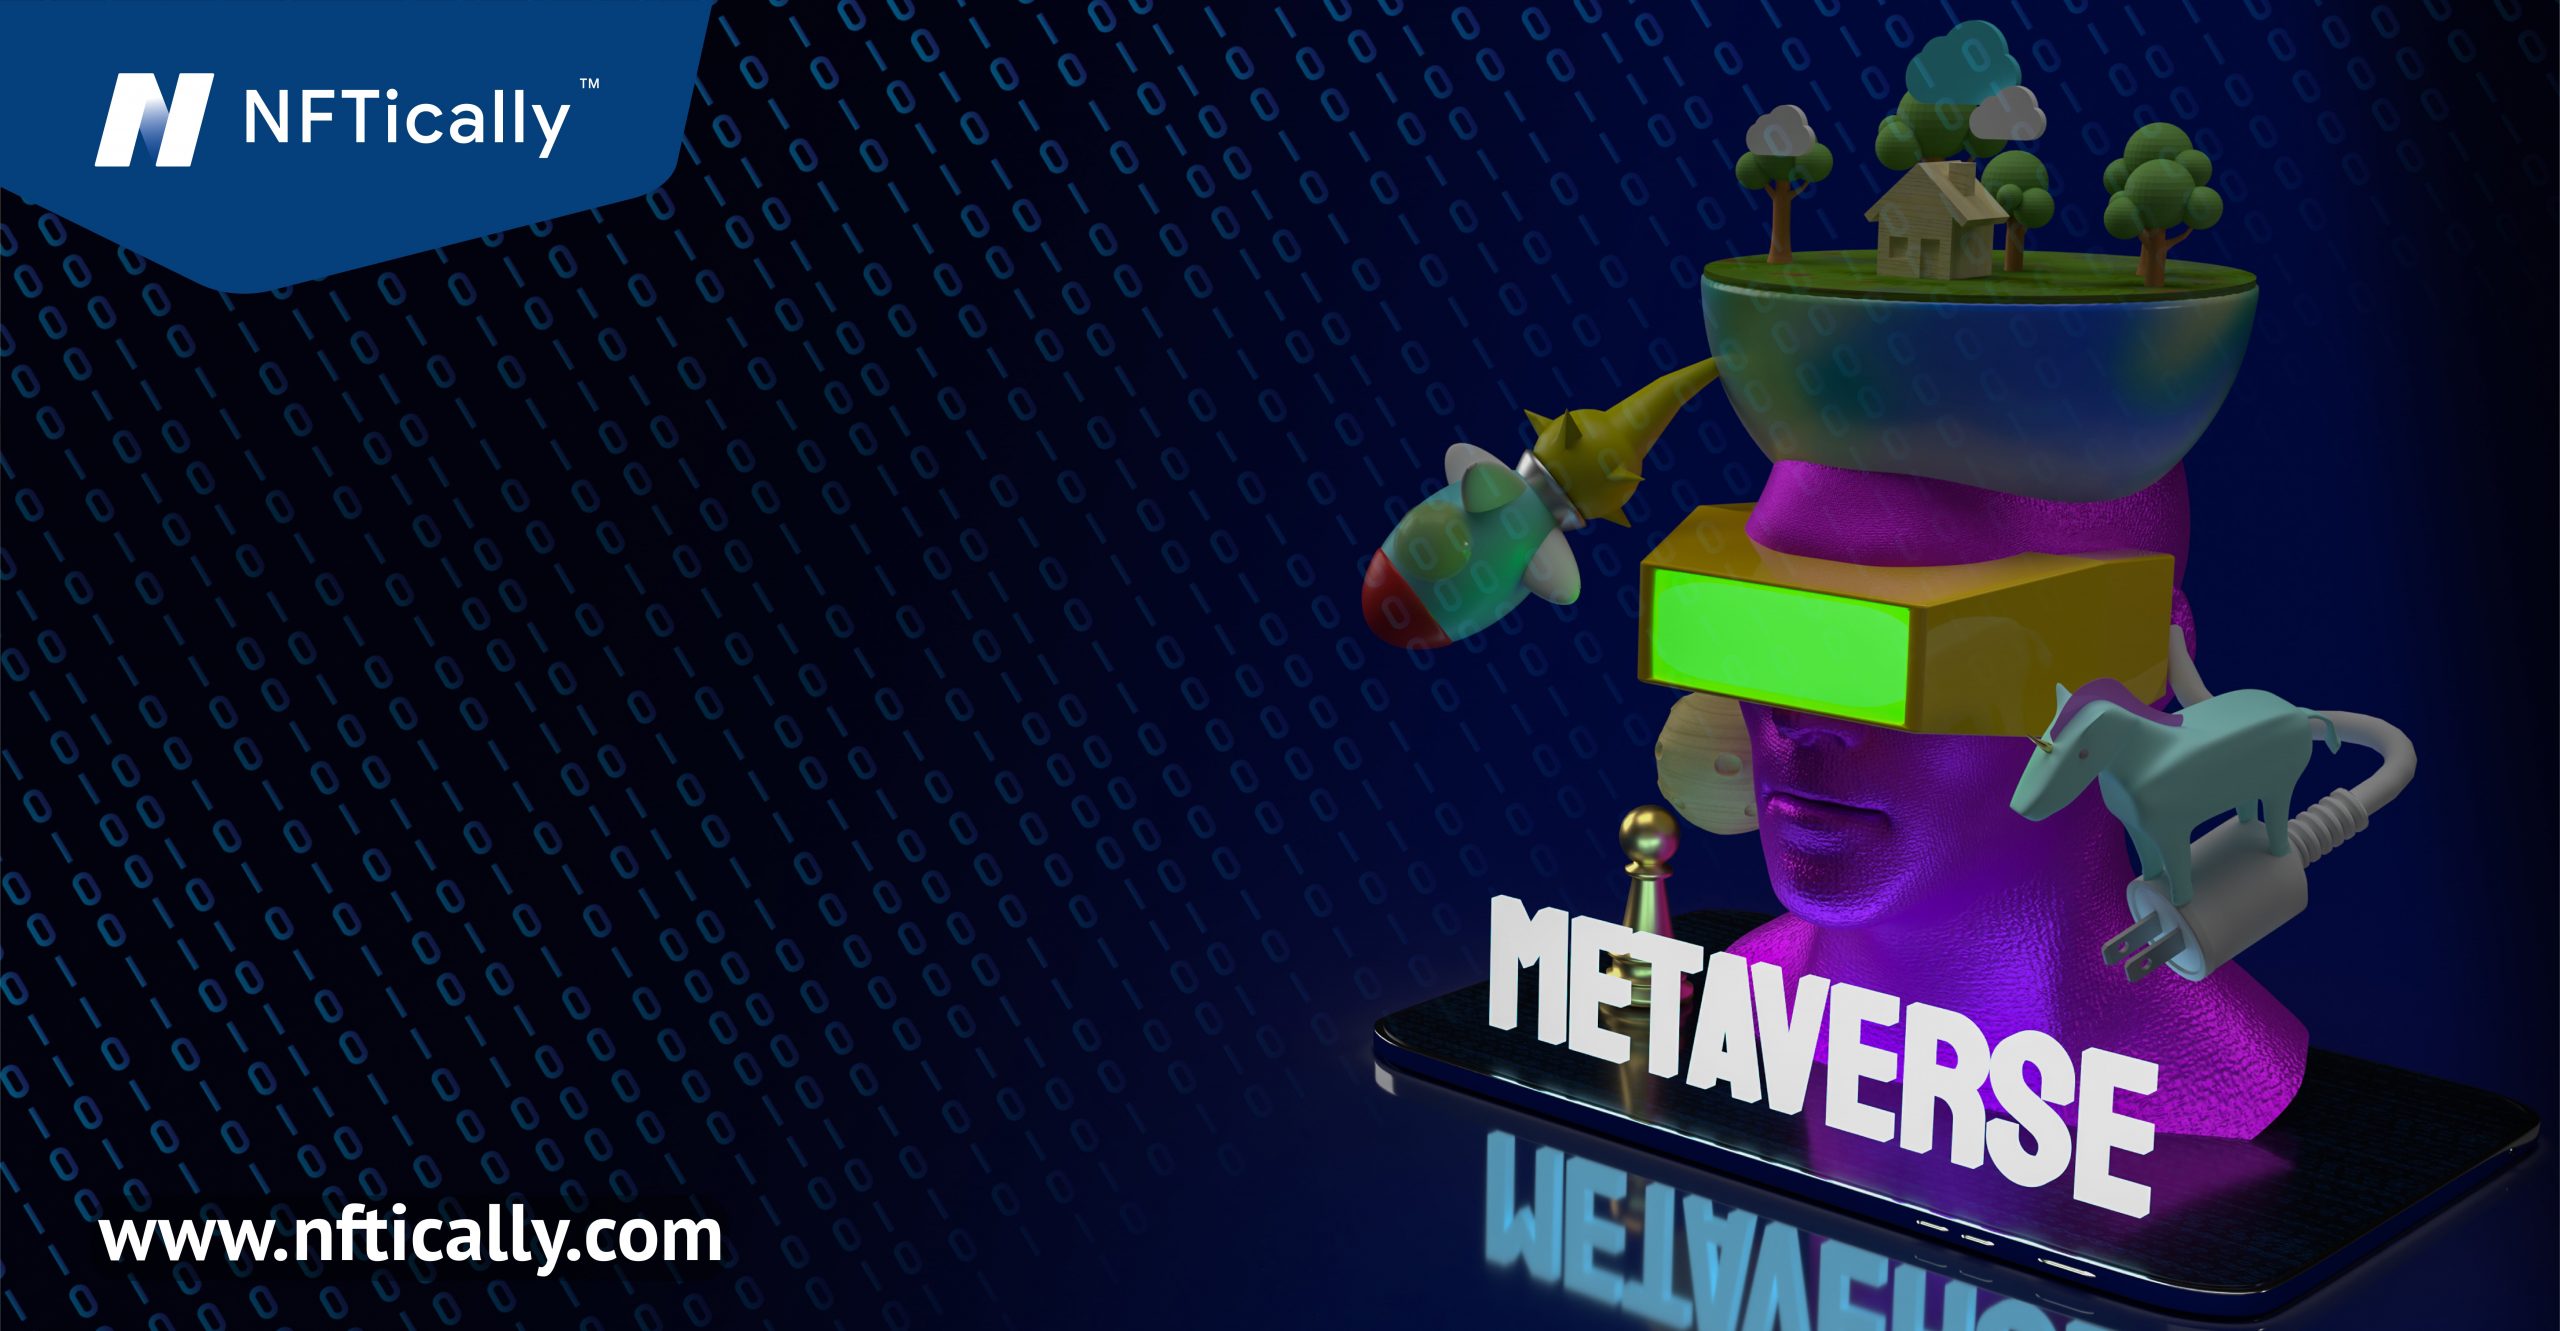 The Metaverse: What It Is, Where to Find it, Who Will Build It